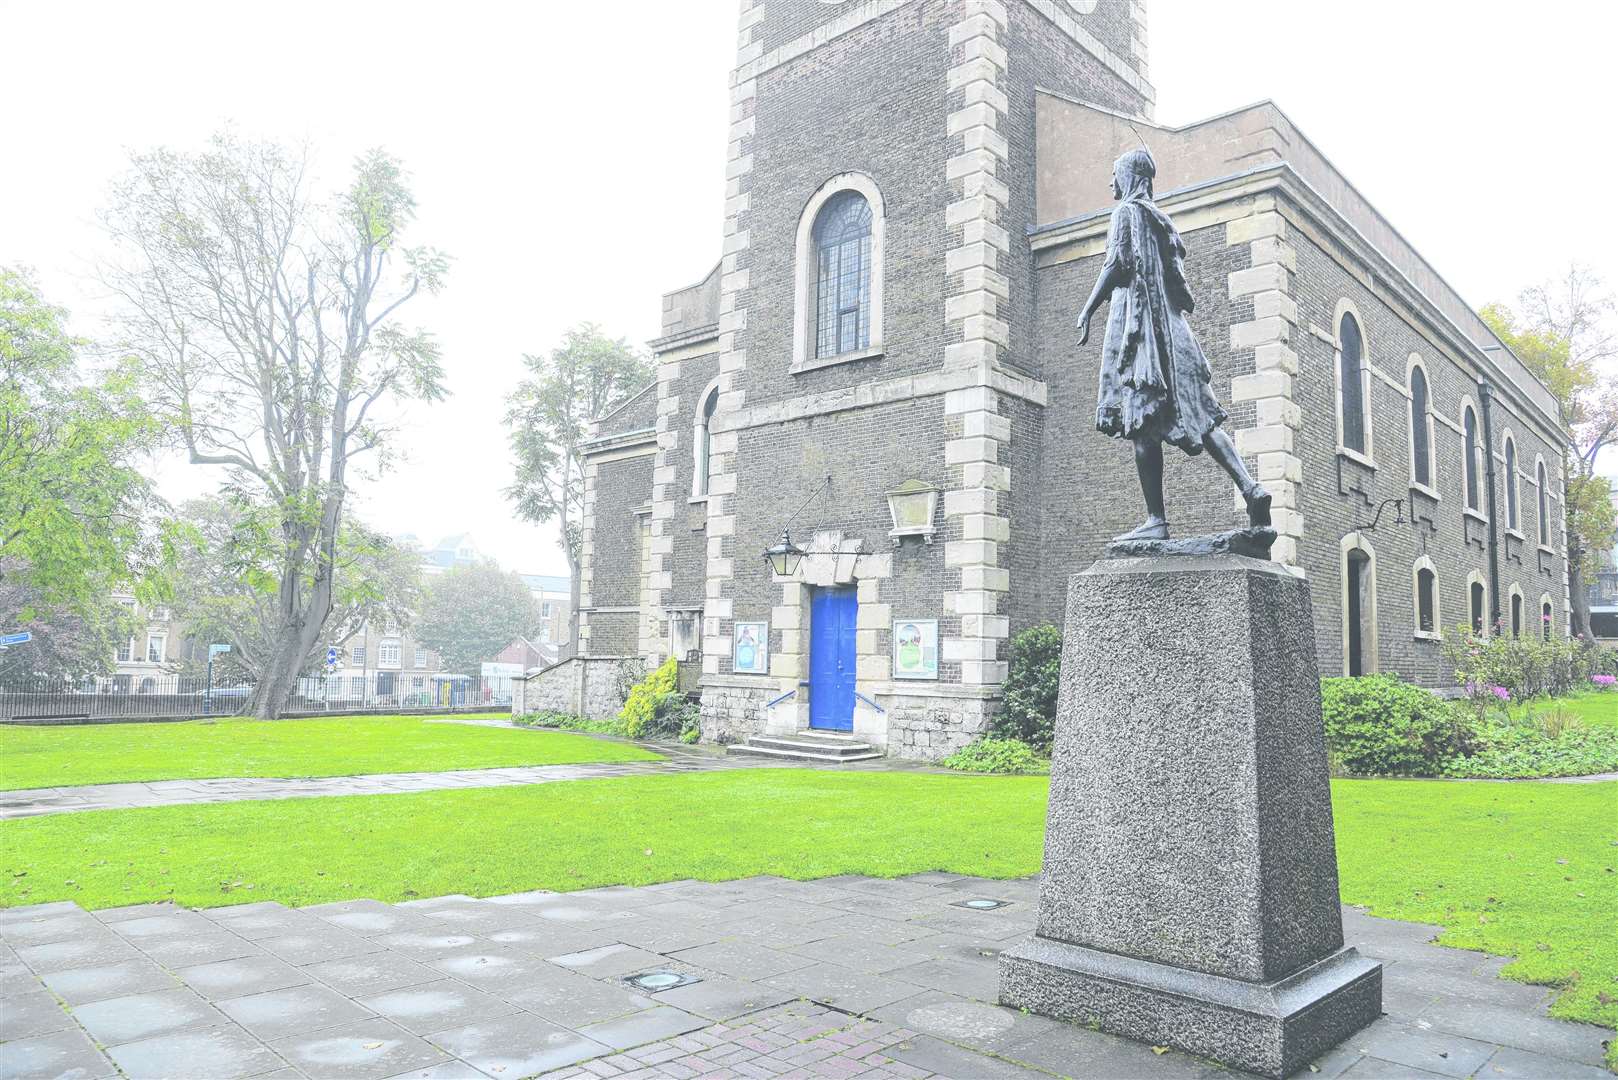 The Princess Pocahontas statue could be about to get some new surroundings Picture: Chris Davey